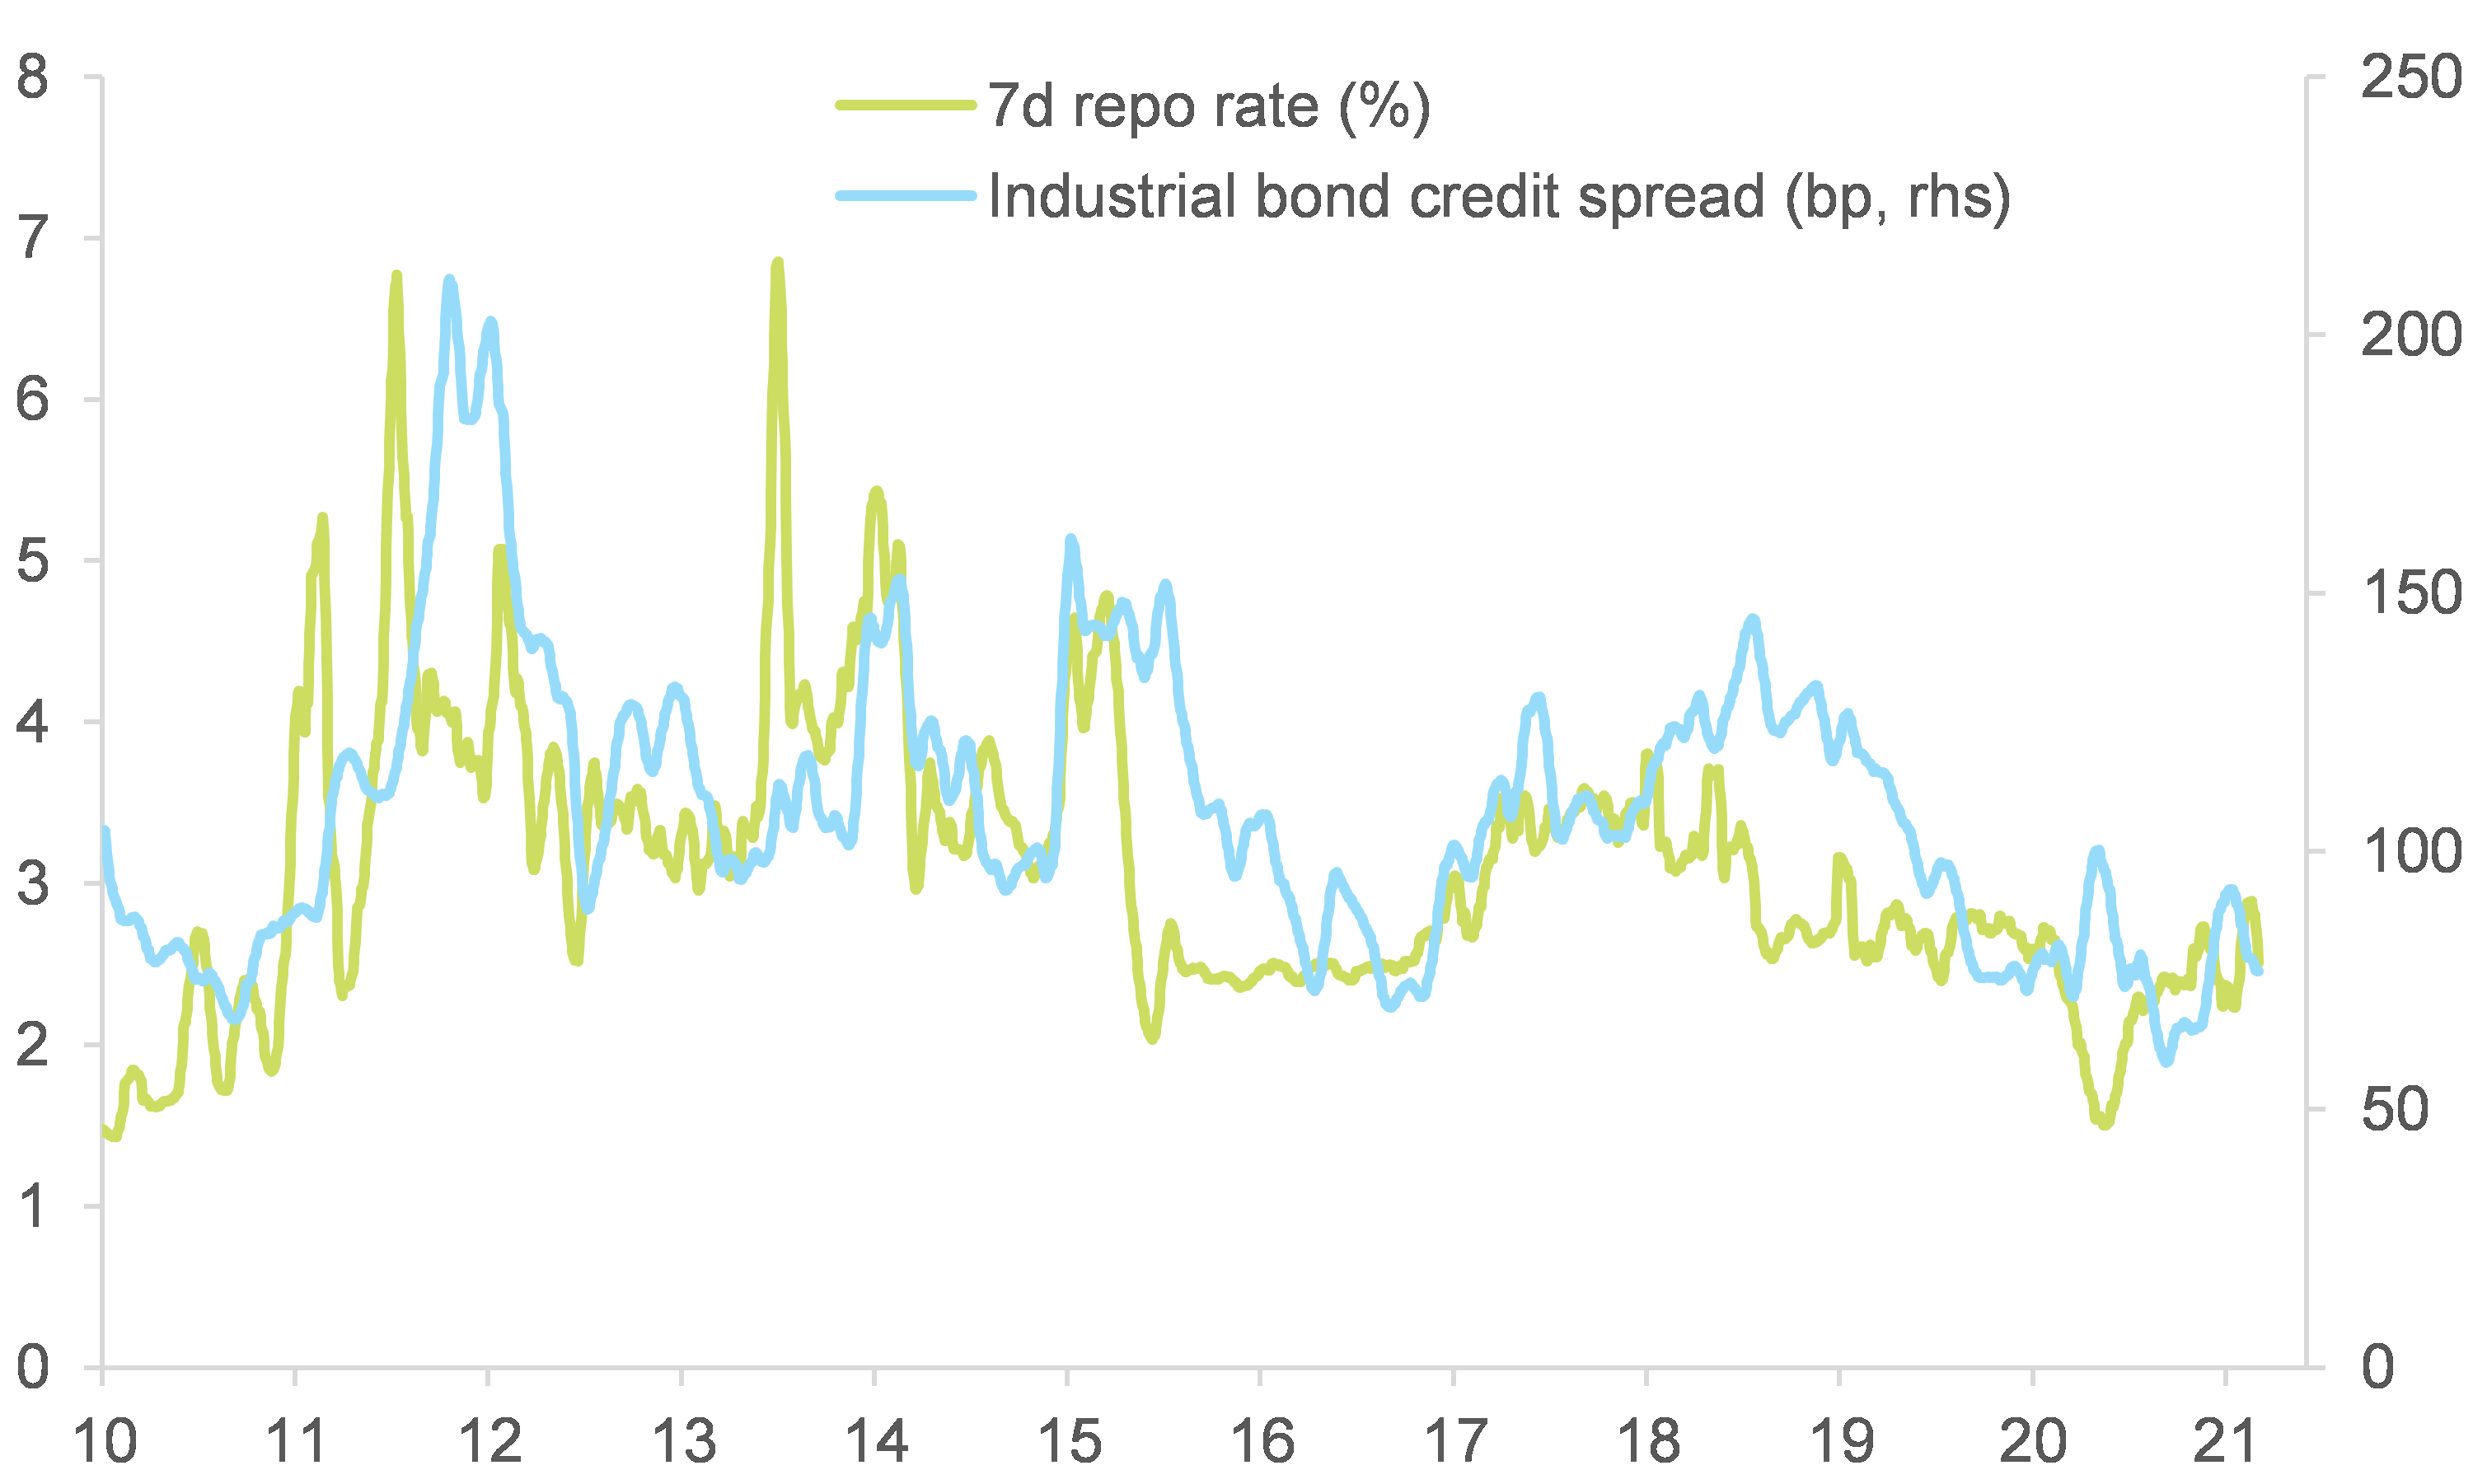  Figure 4 – Interbank rate and industrial bond credit spread